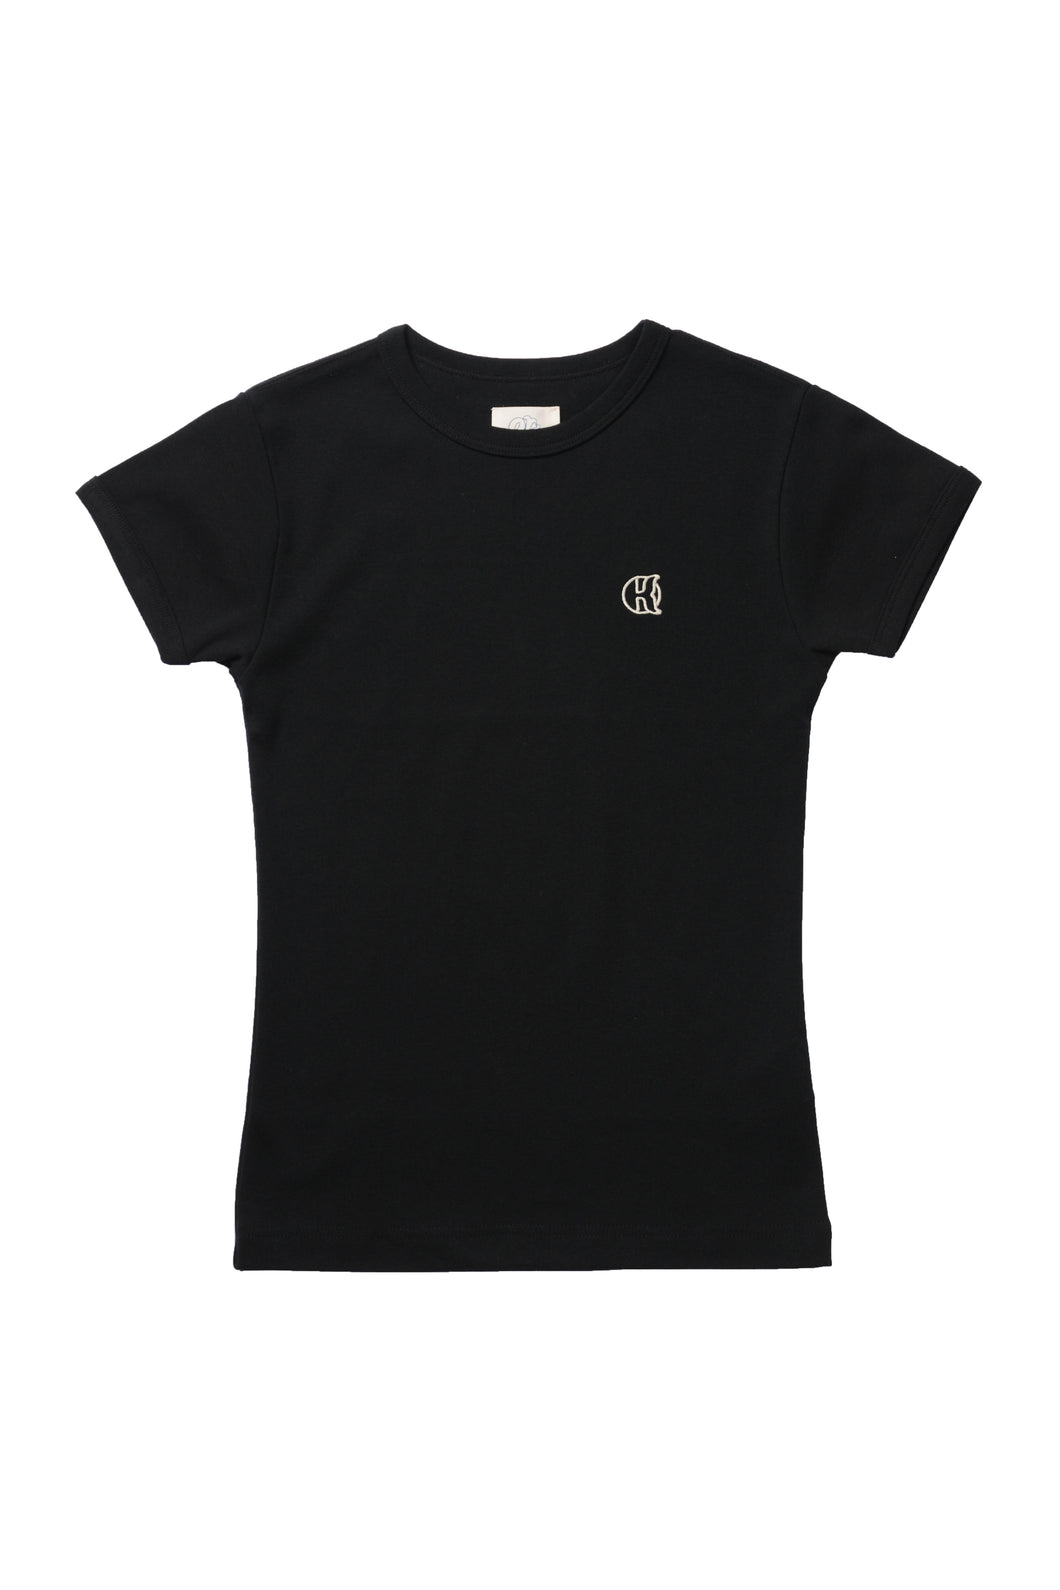 NEW LOGO EMBROIDERY T-SHIRT (BLACK)